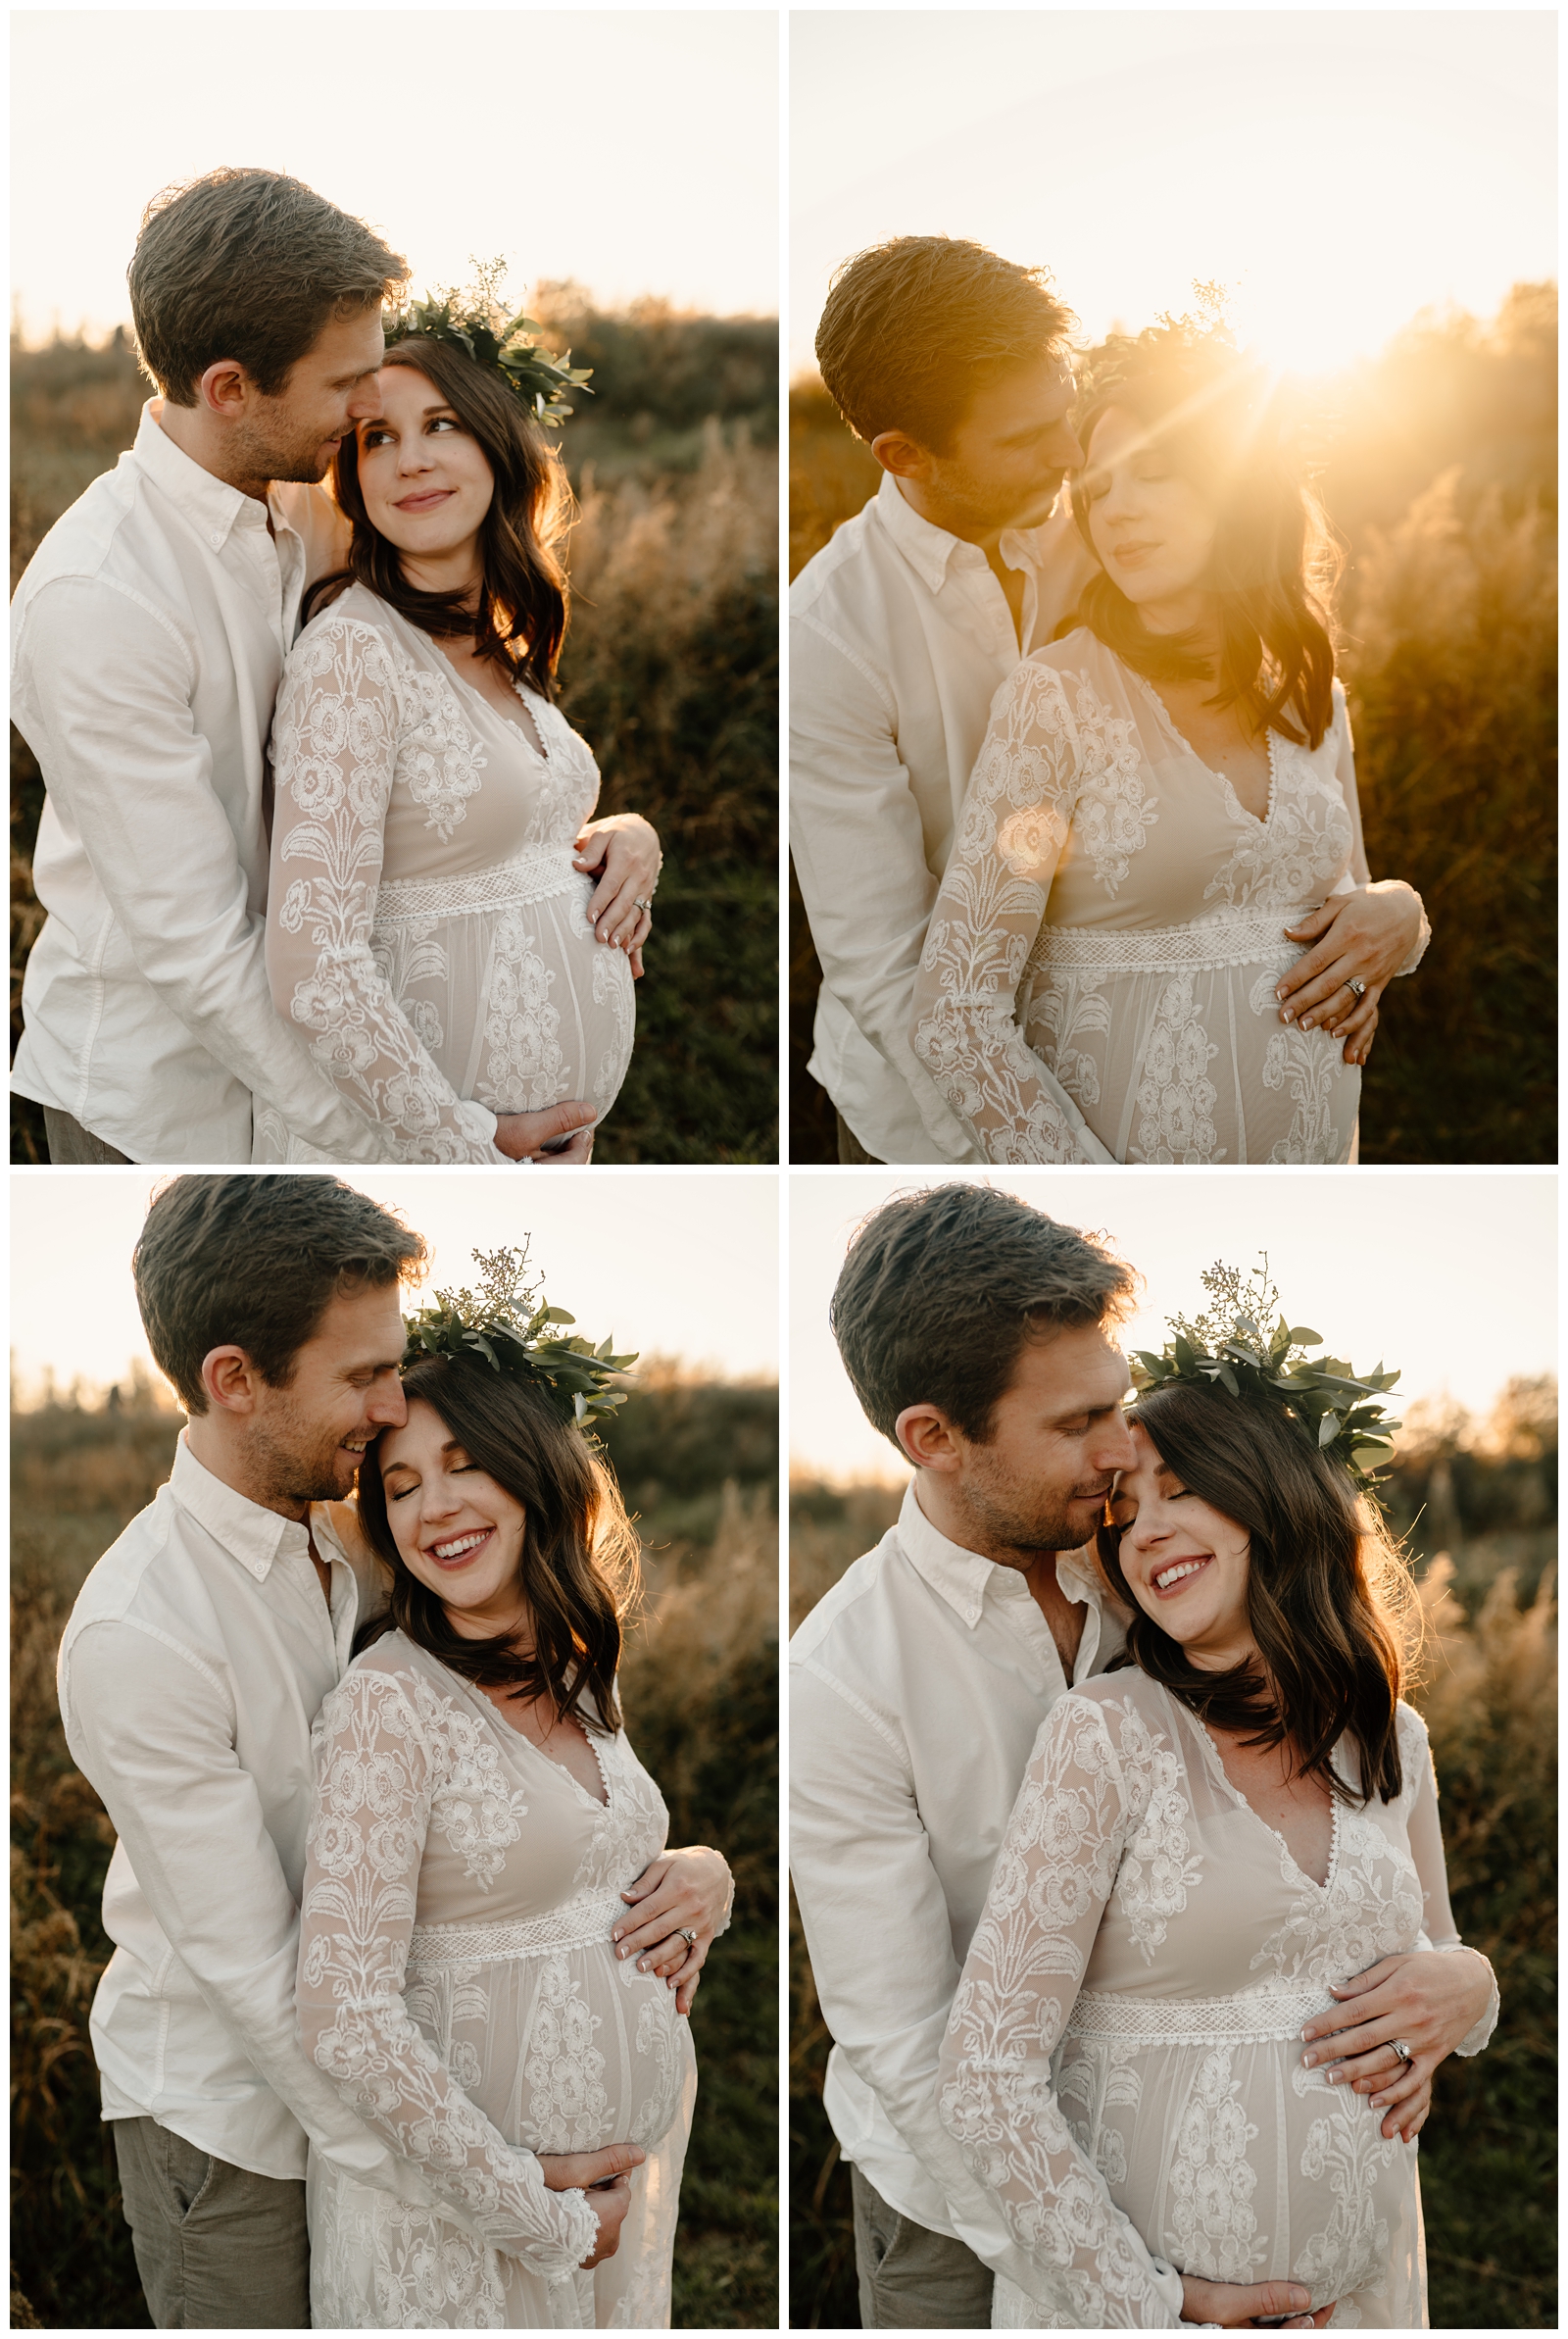 Romantic golden hour maternity session with greenery floral crown, in Winston-Salem North Carolina